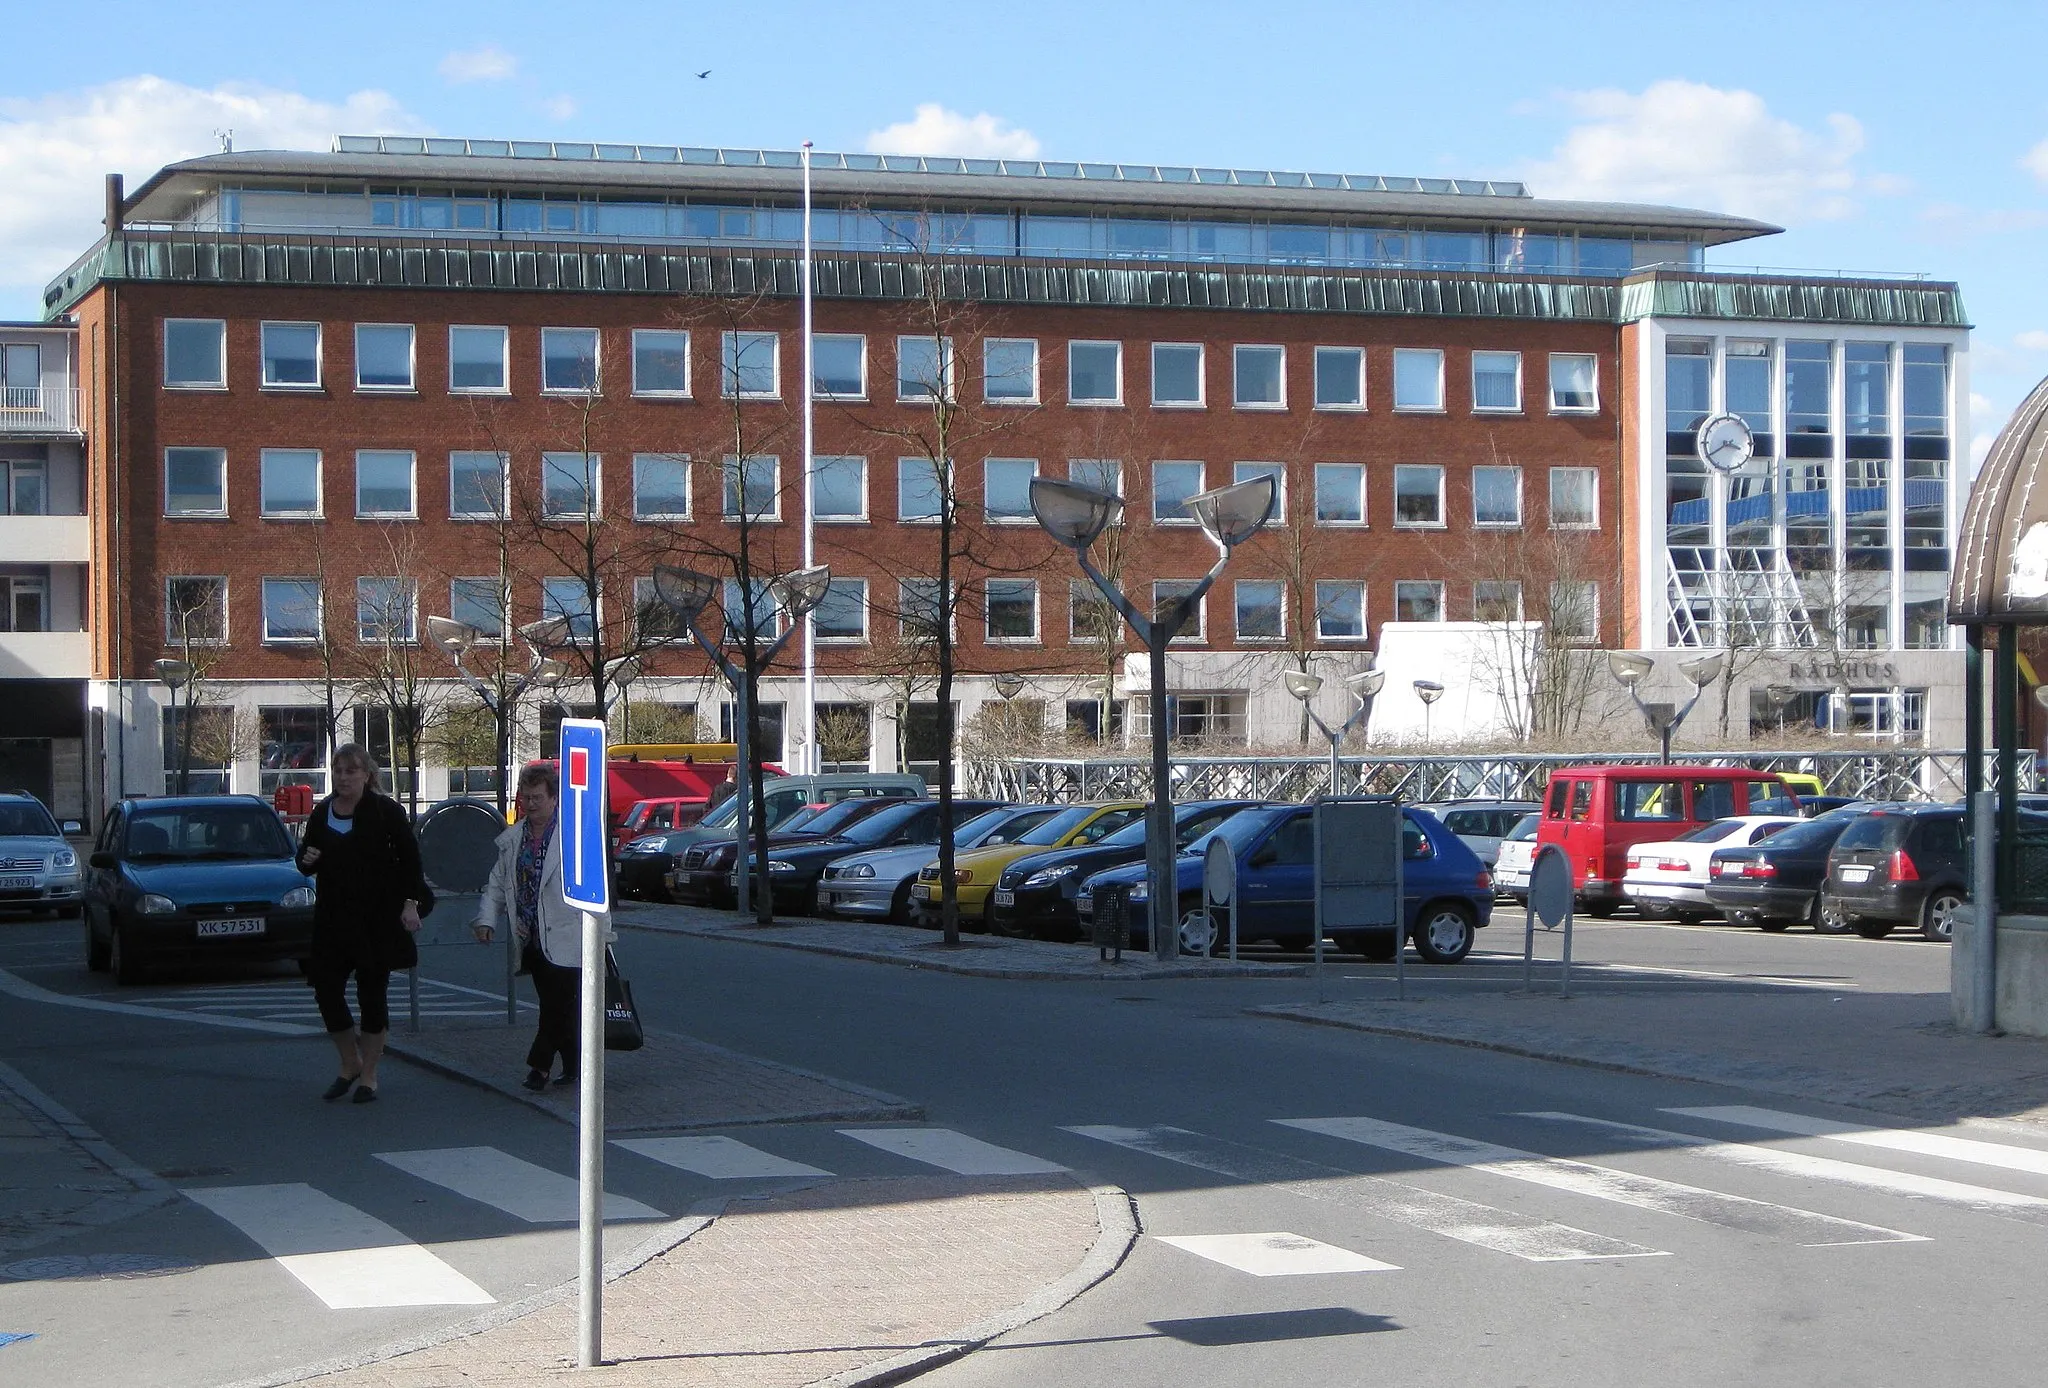 Photo showing: The town hall "Slagelse Rådhus" in Slagelse. The town is located in West Zealand, Denmark.